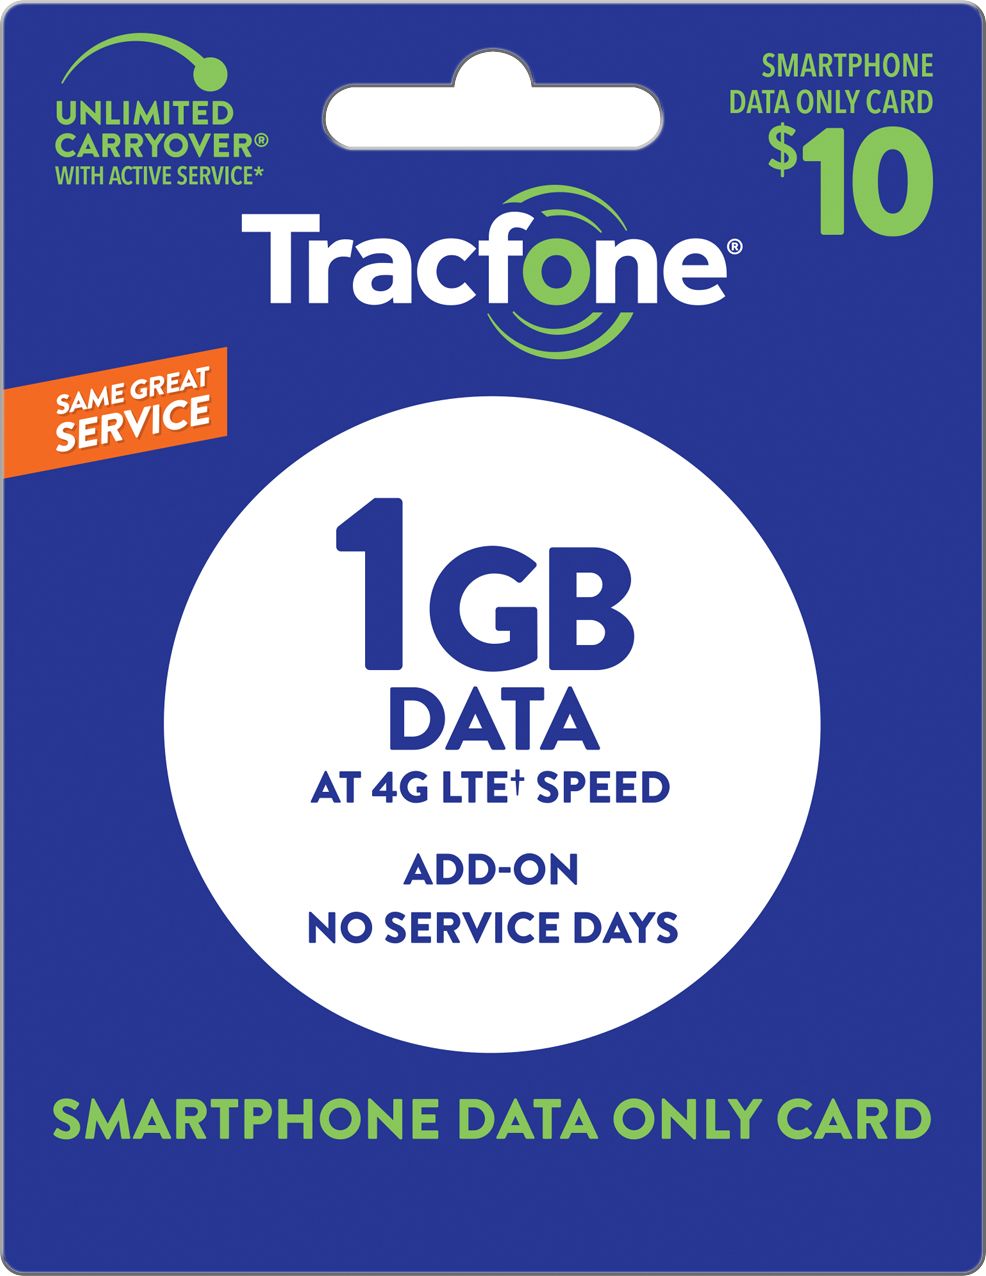 TracFone - $10 Smartphone Data Only Code [Digital]